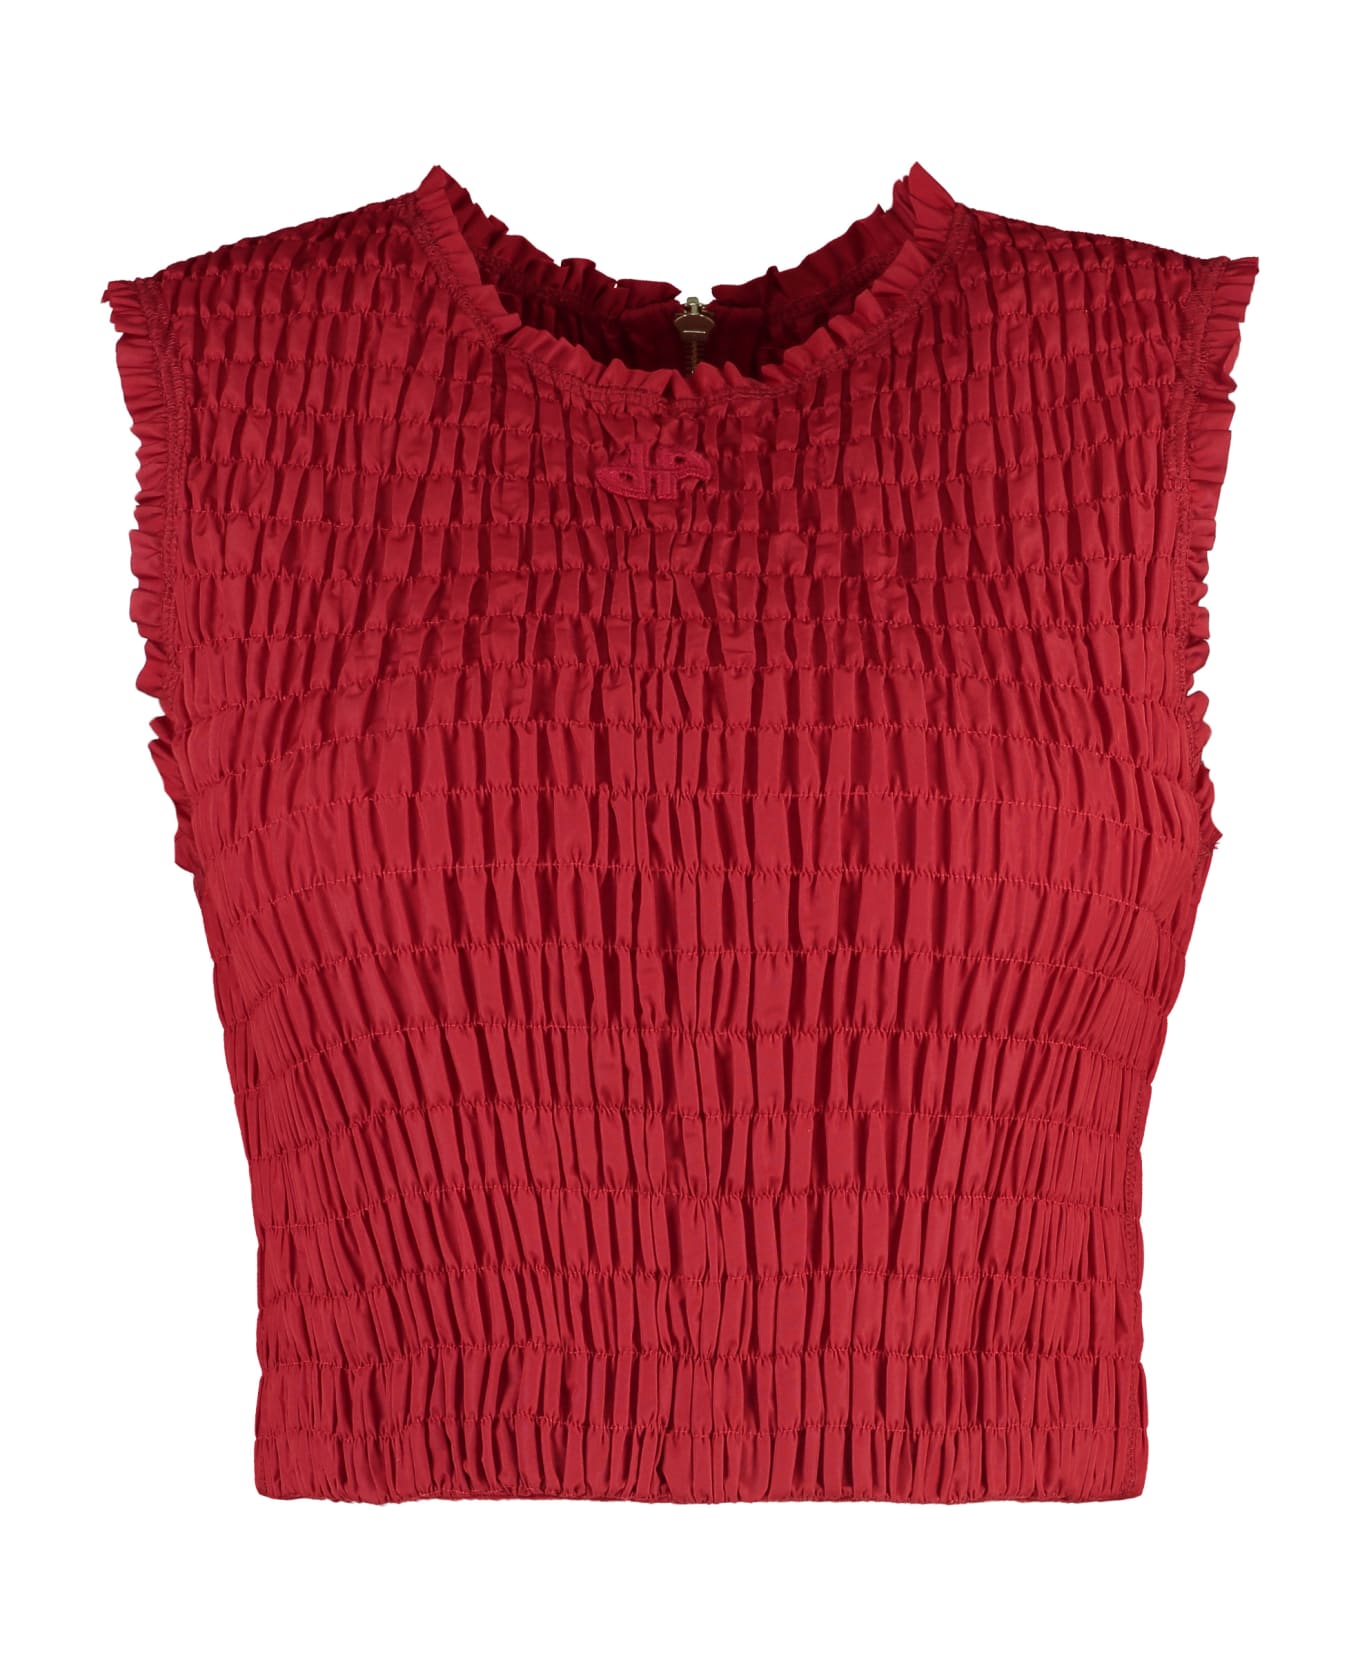 Patou Technical Fabric Crop Top - red トップス